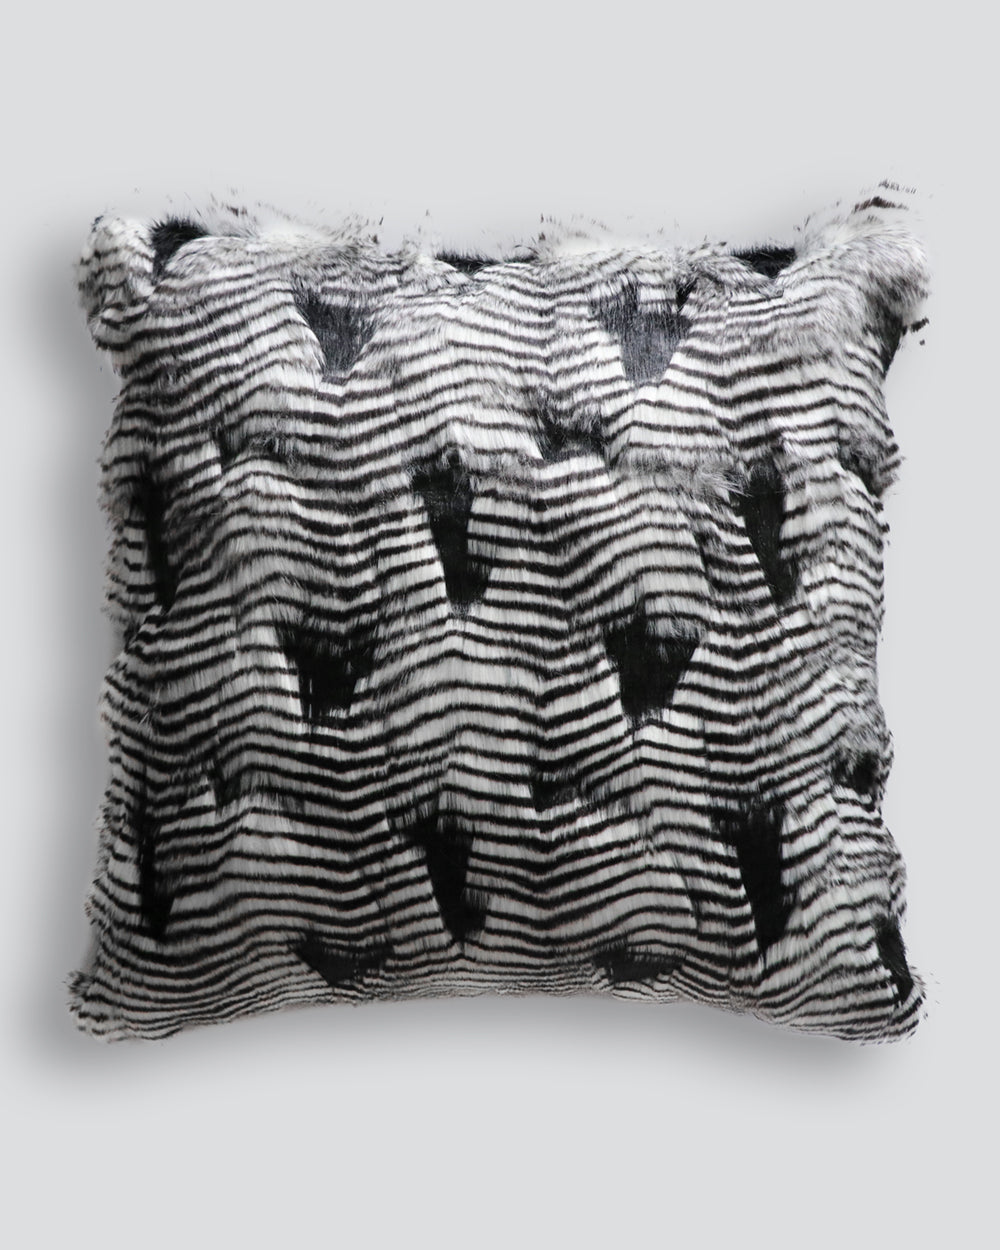 Heirloom Silver Pheasant Cushions in Faux Fur are available from Make Your House A Home Premium Stockist. Furniture Store Bendigo, Victoria. Australia Wide Delivery. Furtex Baya.